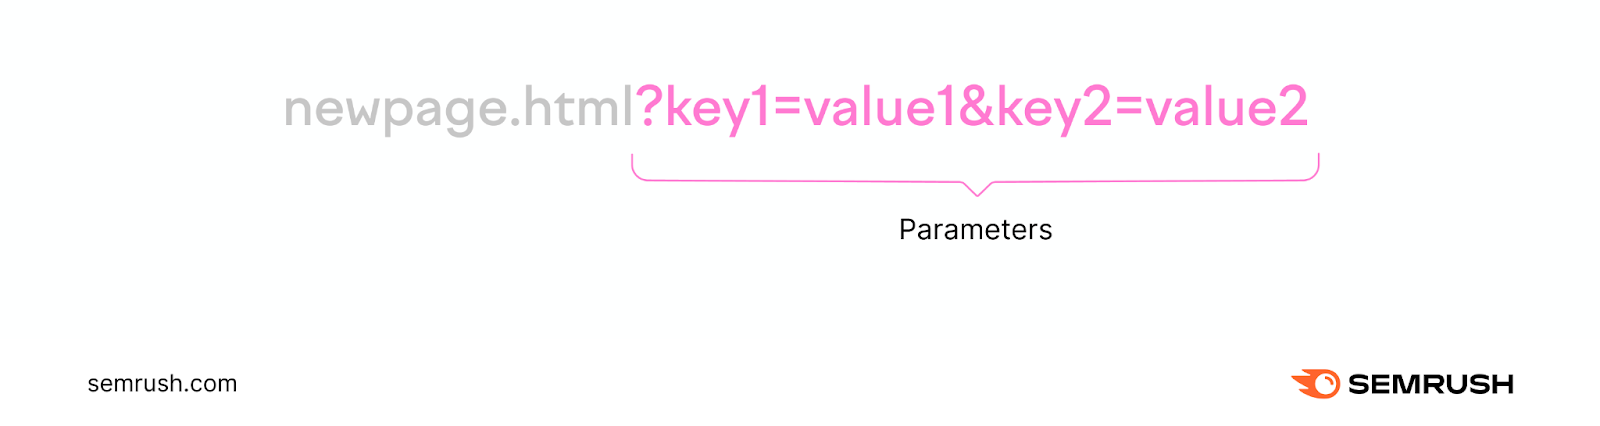 An URL with "?key1=value1&key2=value2" part marked as "parameters"